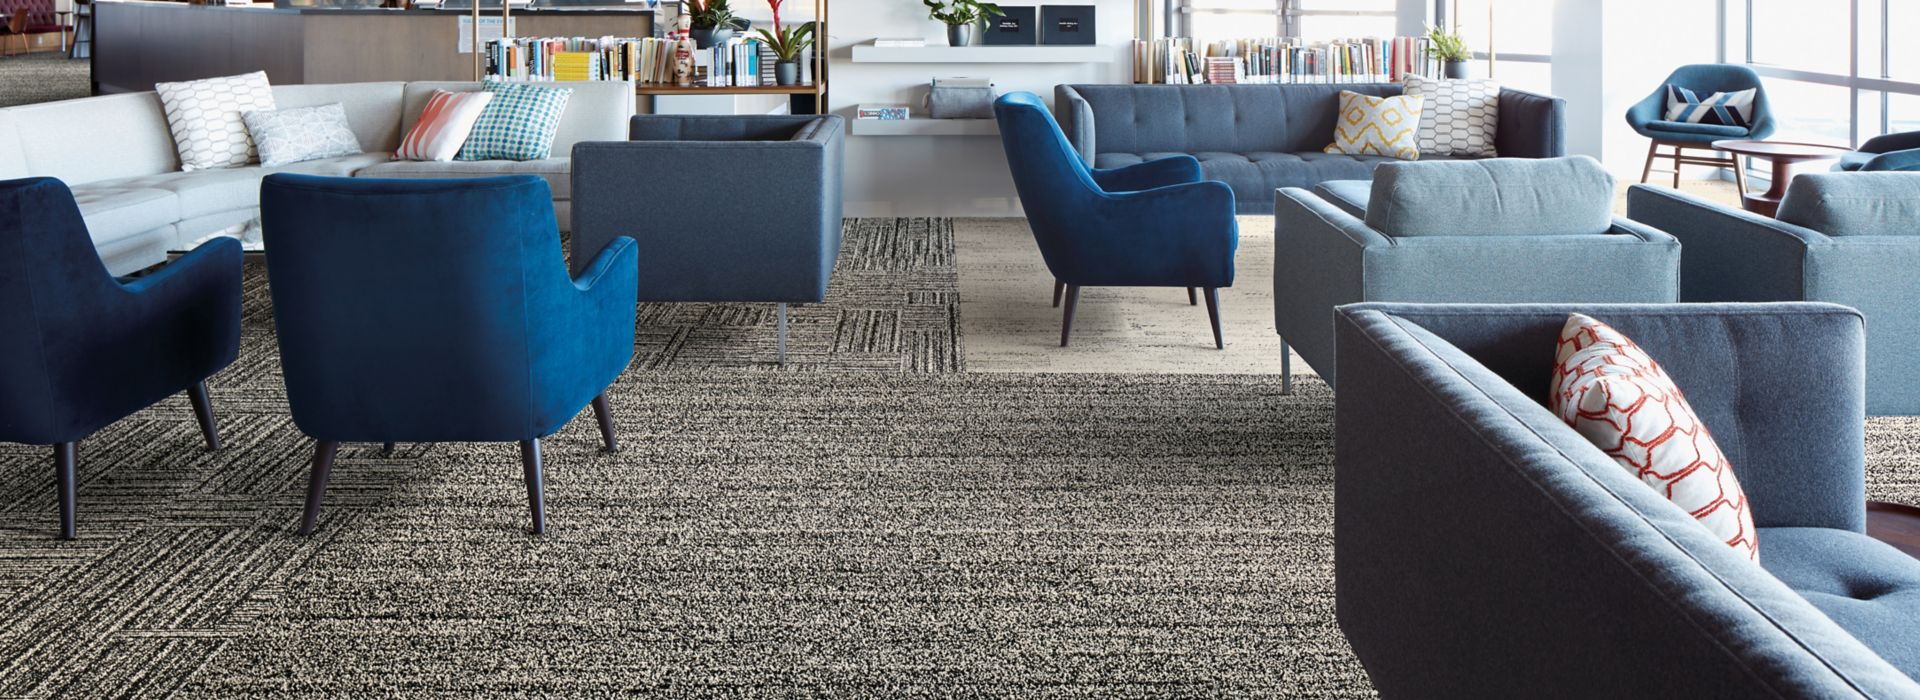 Interface Overedge plank carpet tile in open lounge area with chairs and couches image number 1